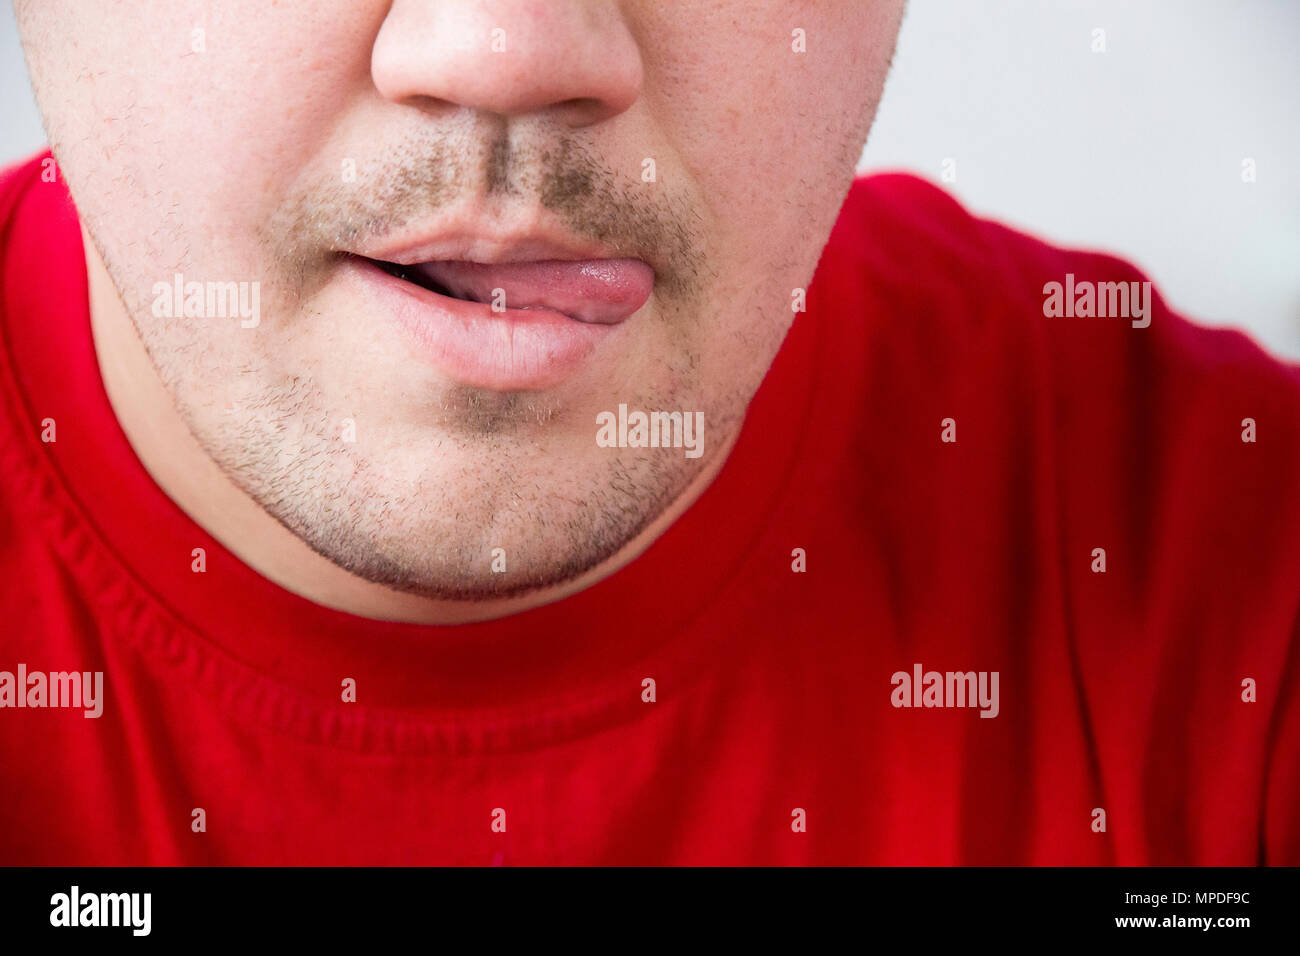 Unshaven man in red shirt tongue licking lips Stock Photo